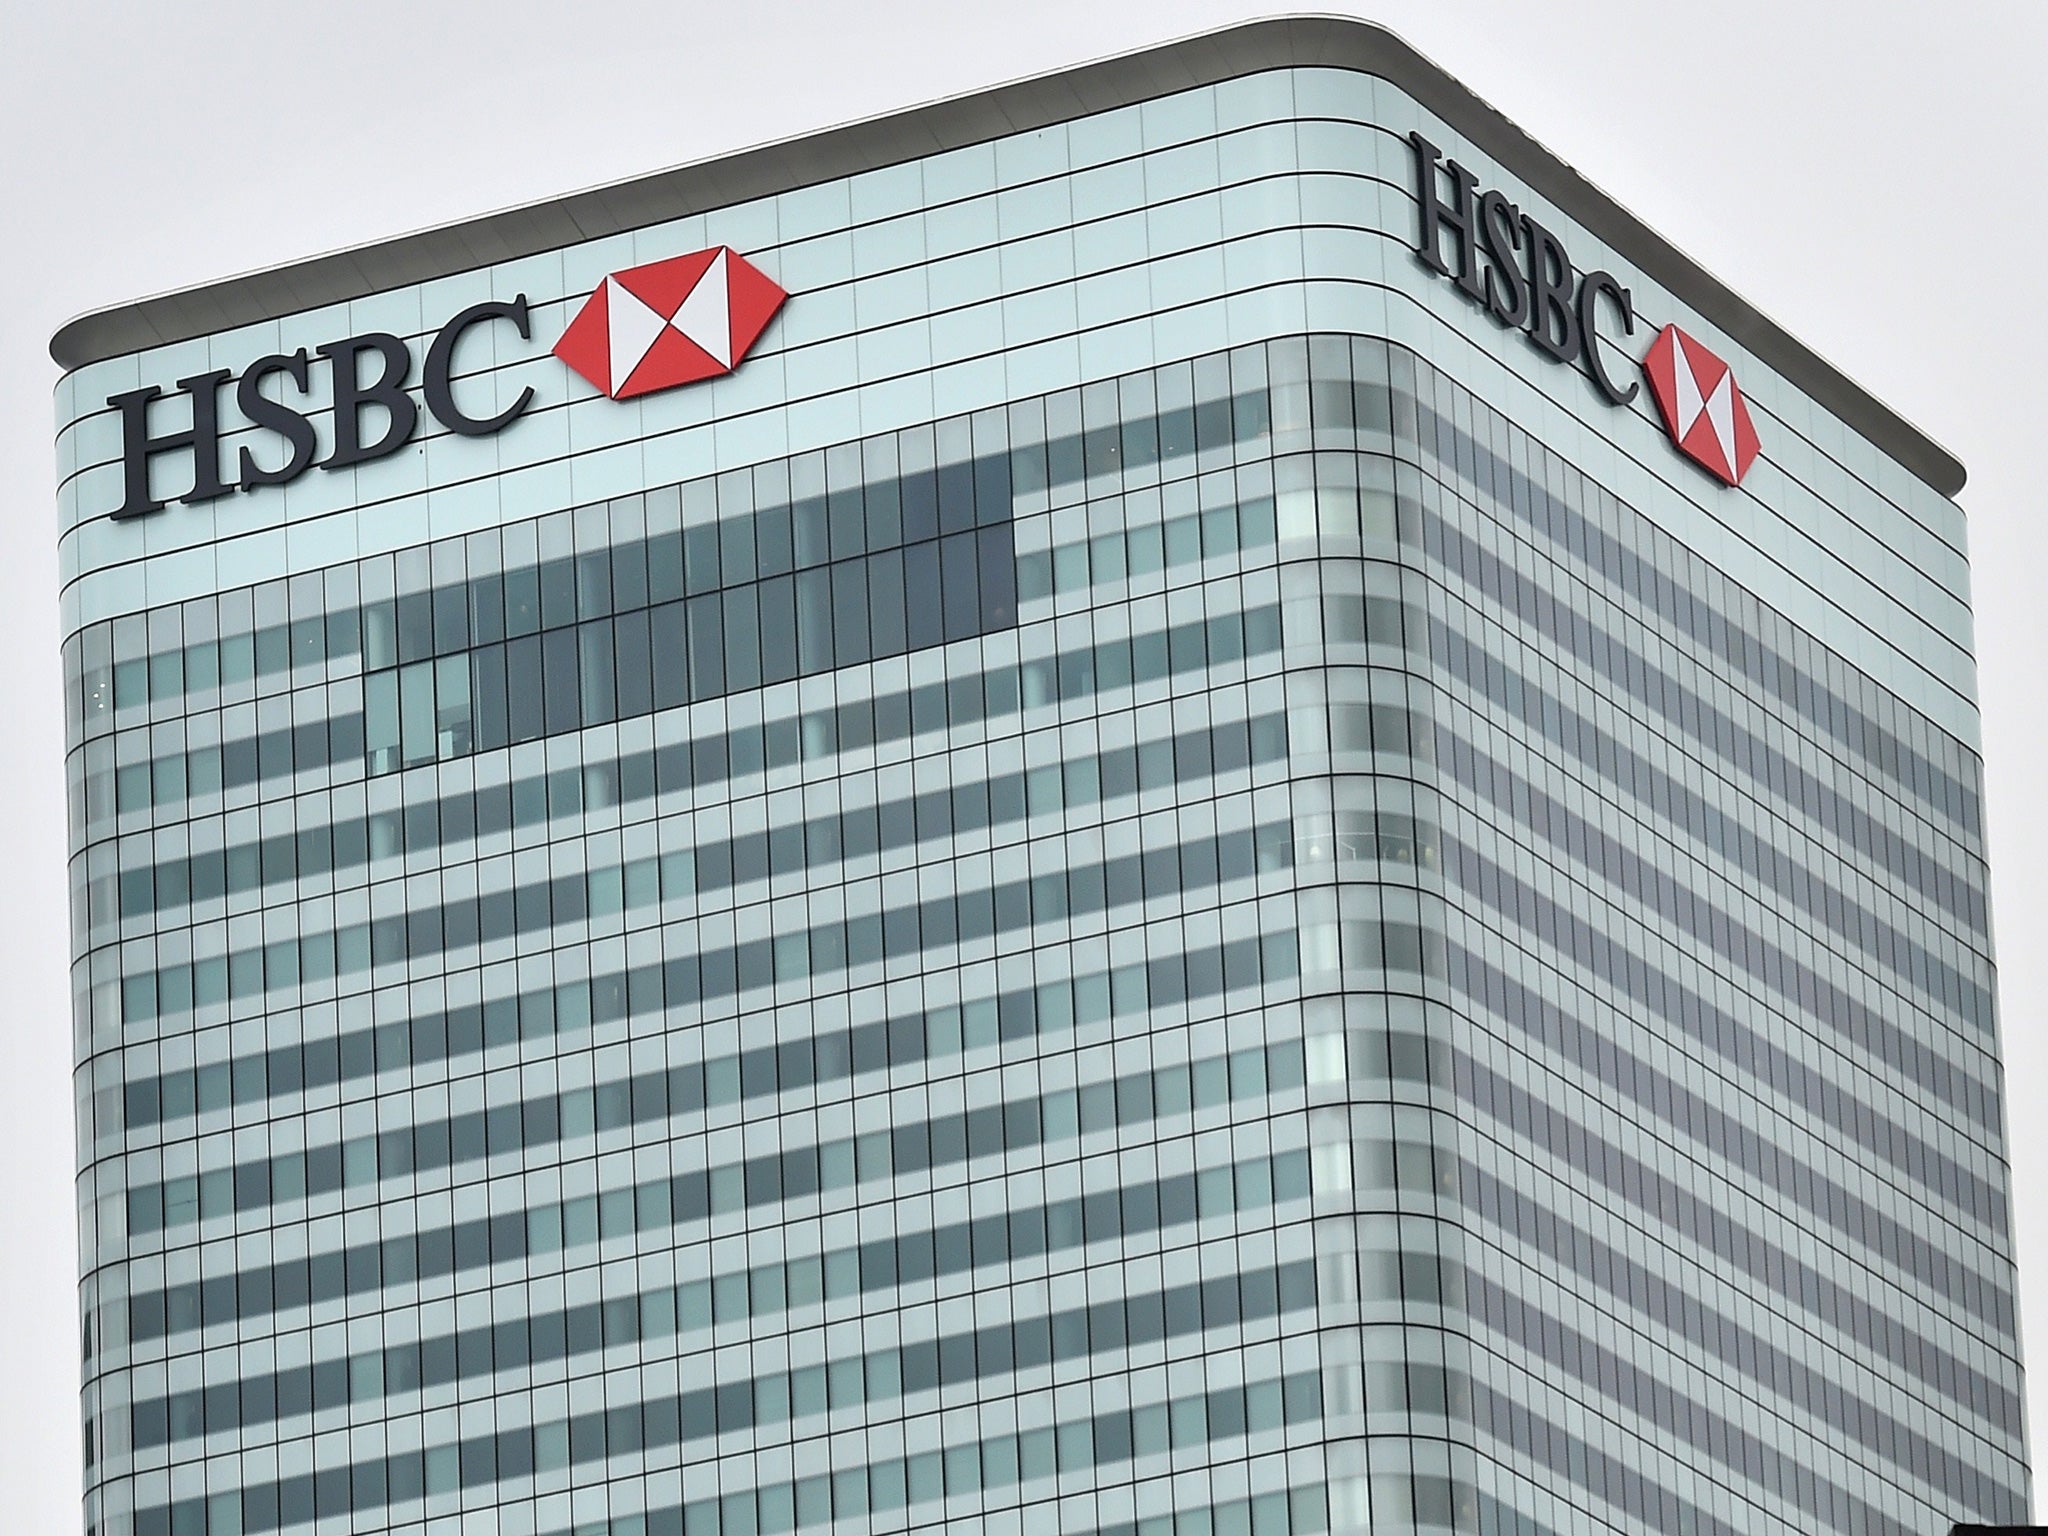 The request from French prosecutors brings HSBC’s Swiss unit a step closer to what could be an explosive tria